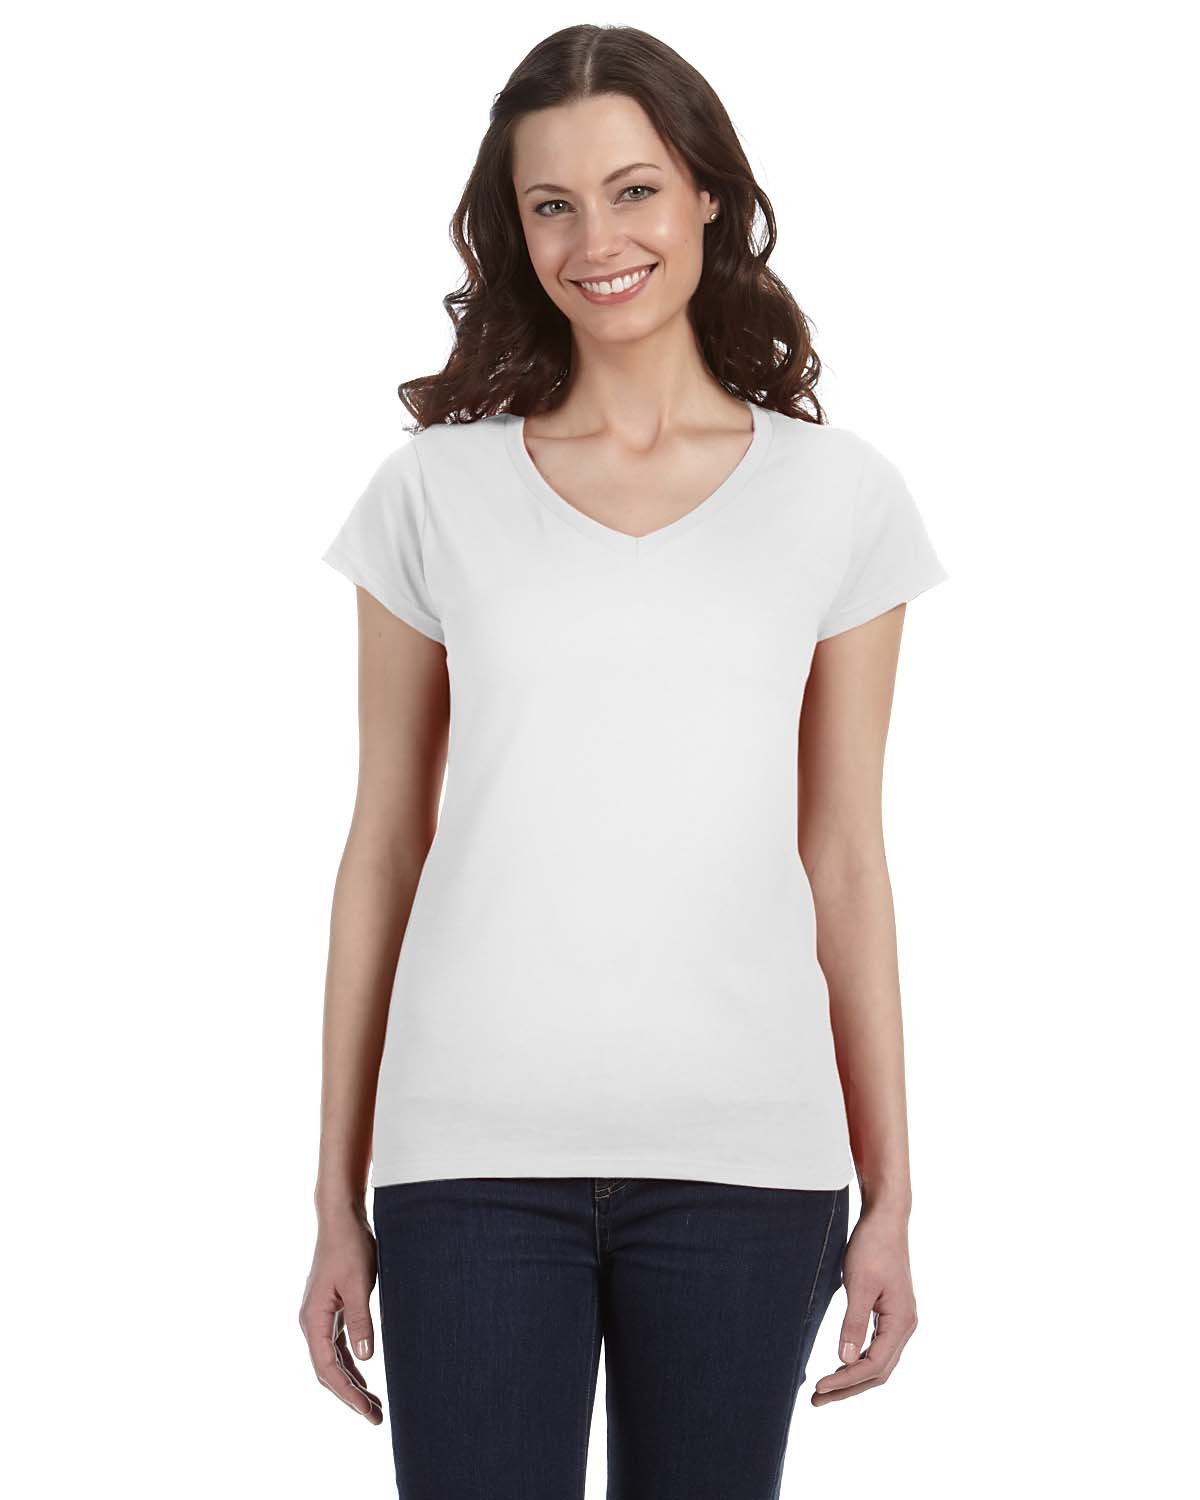 Gildan Ladies' SoftStyle®  Fitted V-Neck T-Shirt WHITE 